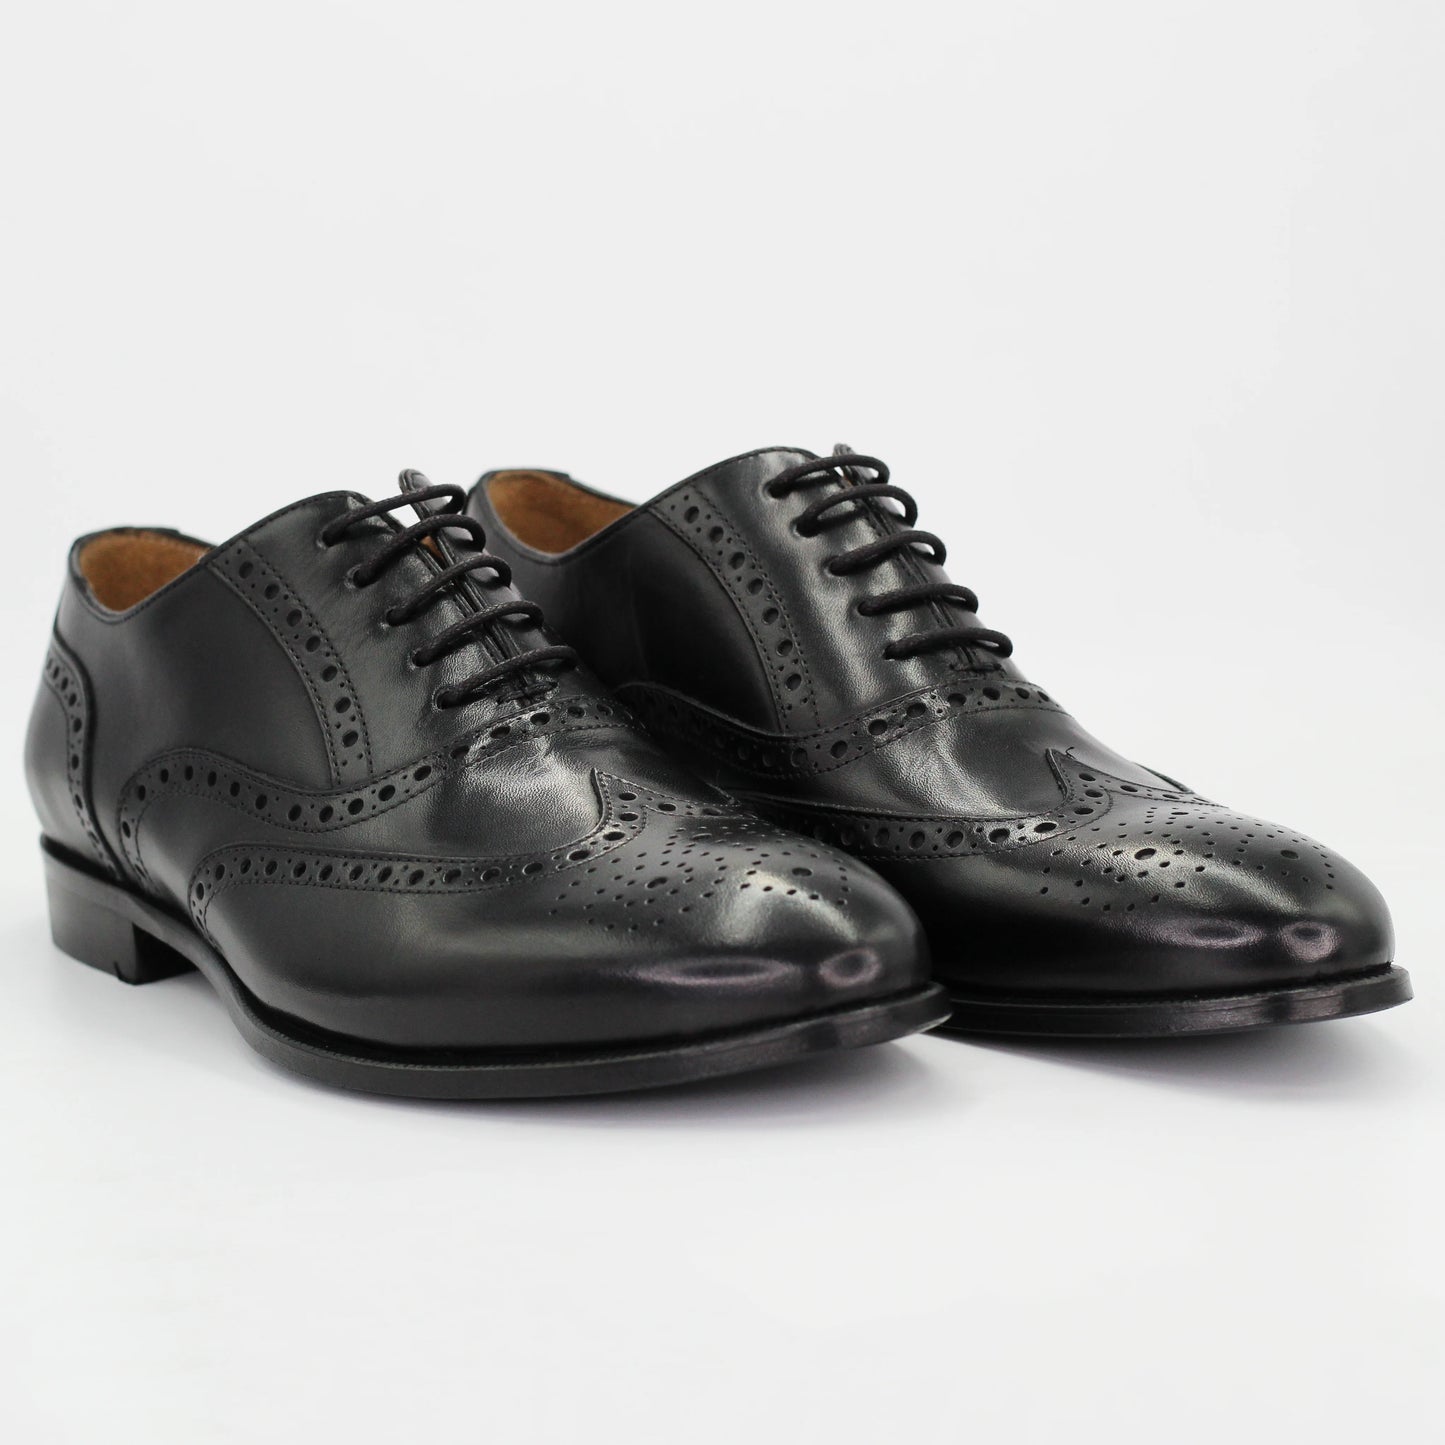 Shop Handmade Italian Leather derby brogue in nero (BRU11911) or browse our range of hand-made Italian shoes in leather or suede in-store at Aliverti Cape Town, or shop online. We deliver in South Africa & offer multiple payment plans as well as accept multiple safe & secure payment methods.